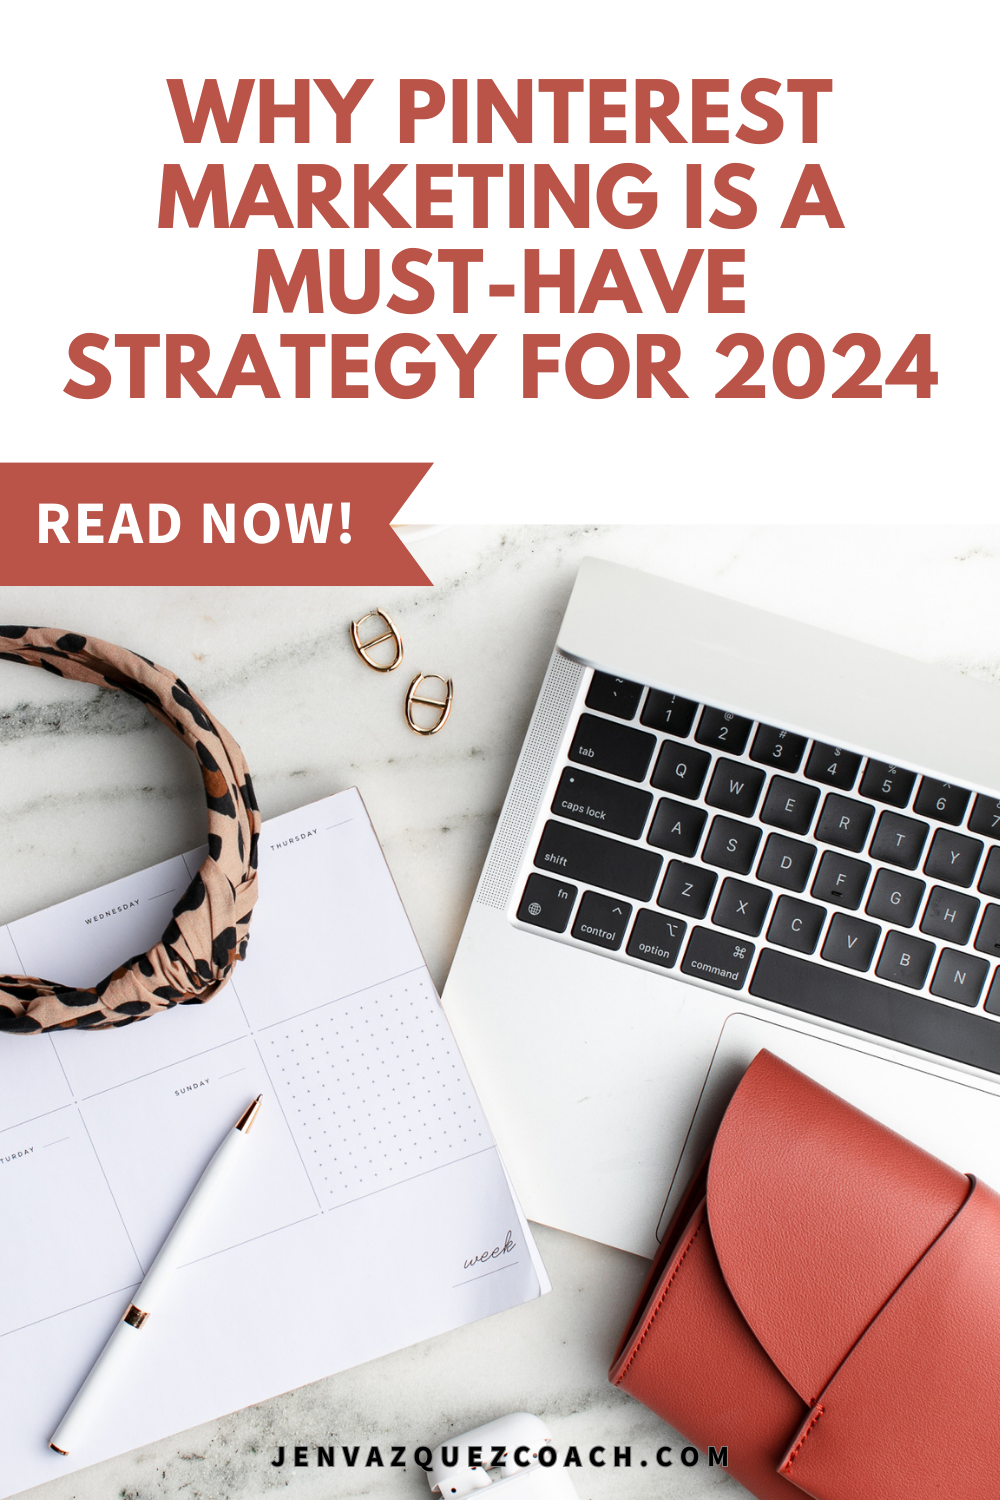 Why Pinterest Marketing is a Must-Have Strategy for Small Businesses going into 2004